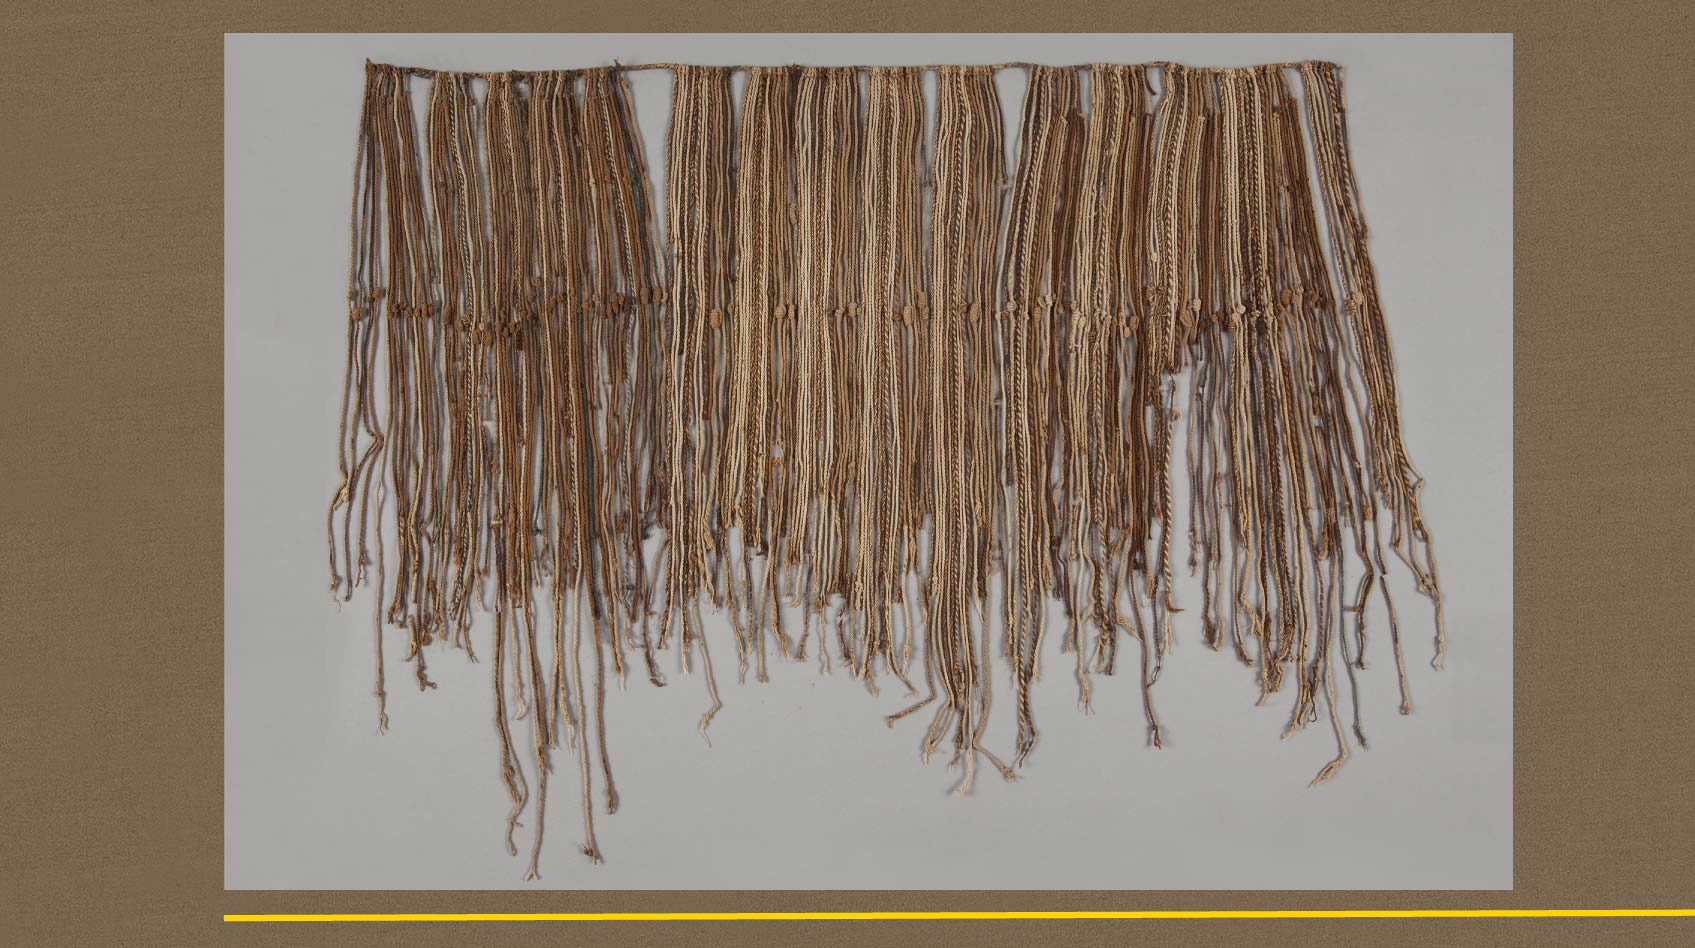 Quipu 55: Quipu Nasca. National Museum of World Culture, Museum of Ethnography, Sweden.